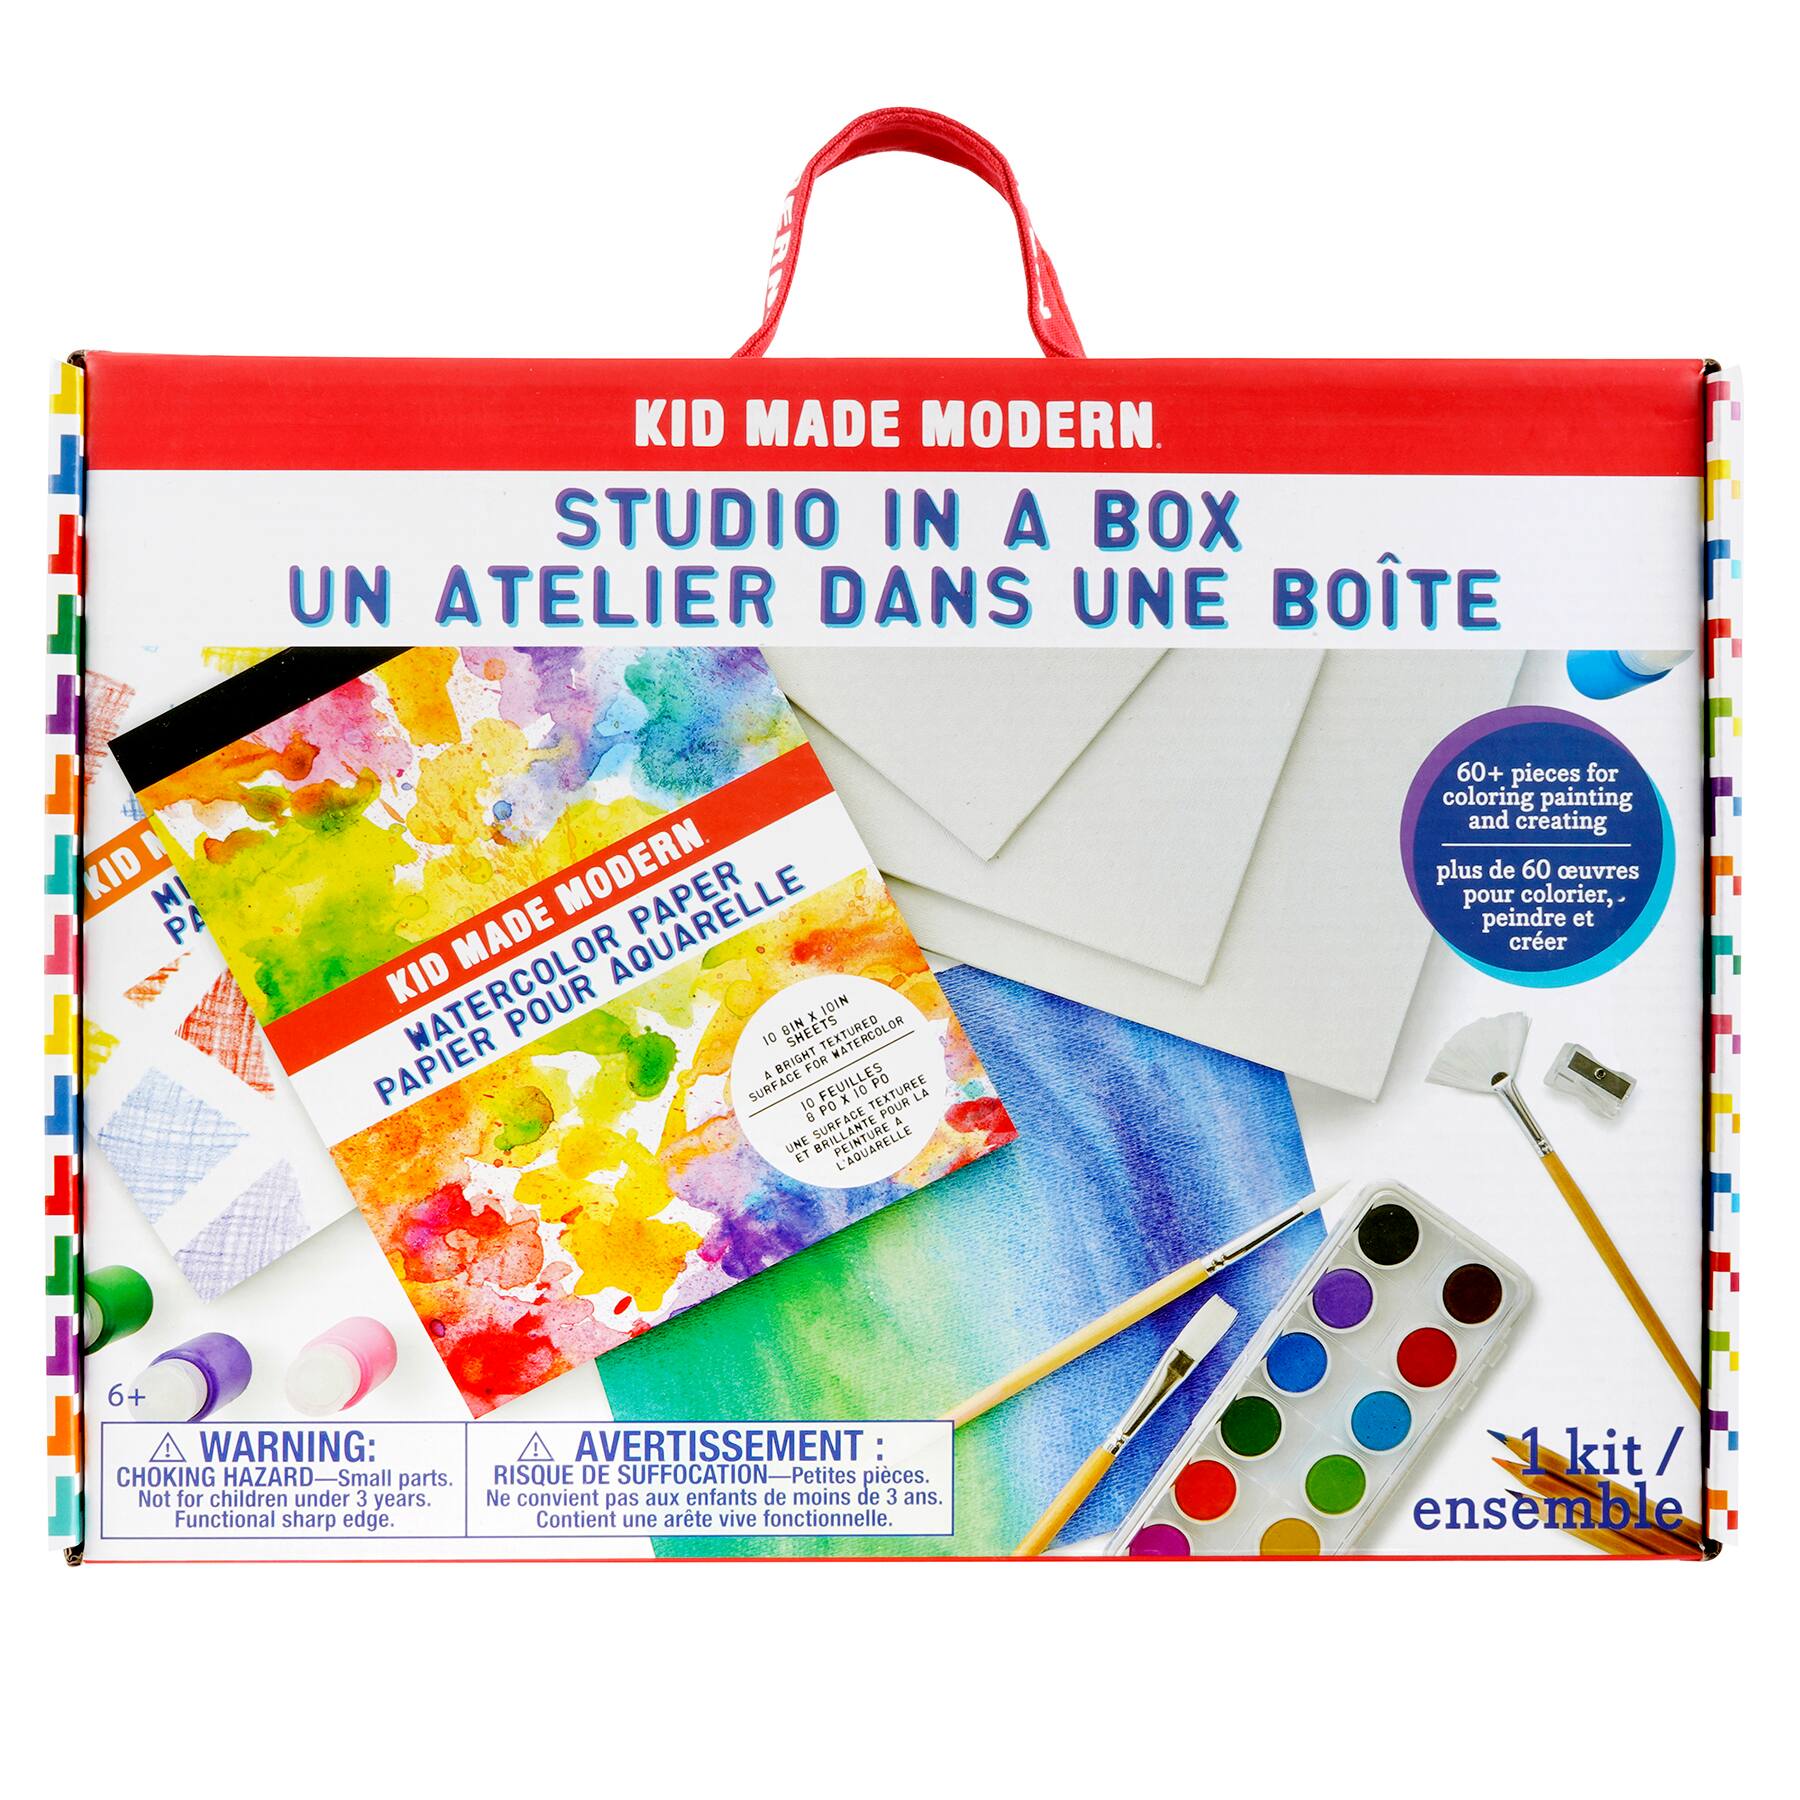 Painting Sketching and Coloring Arts and Crafts Kit Kid Made Modern Studio in A Box Set 